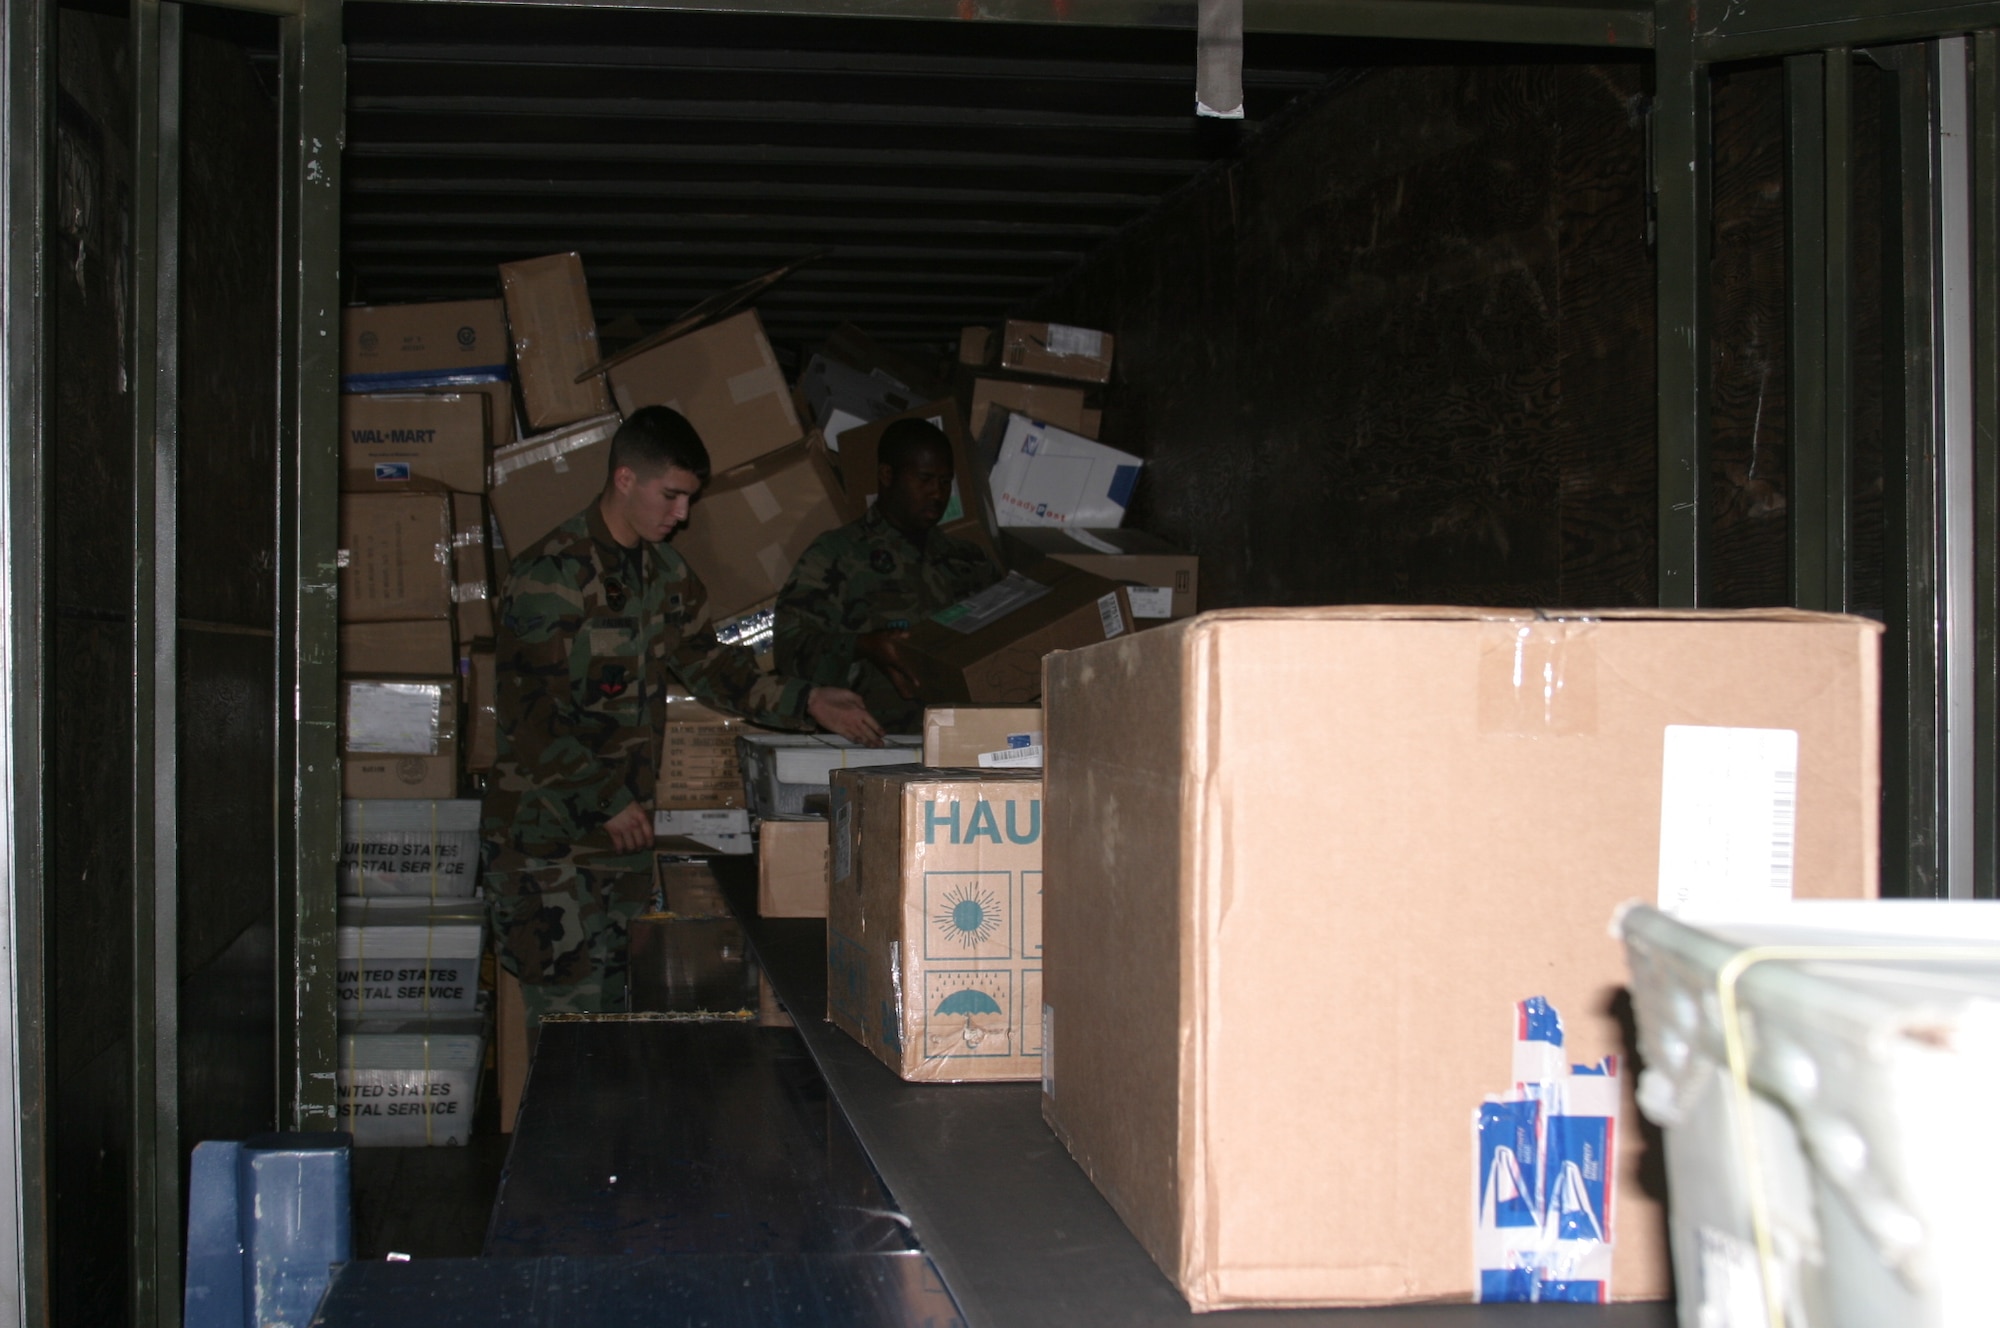 Airmen 1st Class Robert Zaldivar and Michael Smith, both with Detachment 3 Pacific Air Forces Air Postal Squadron, offload holiday mail and packages from a semi-truck trailer Nov. 29. In addition to regular mail, Aerial Mail Terminal professionals receive two, sometimes three, trailers of bulk mail such as magazines.
(U.S. Air Force/Senior Airman Nestor Cruz)